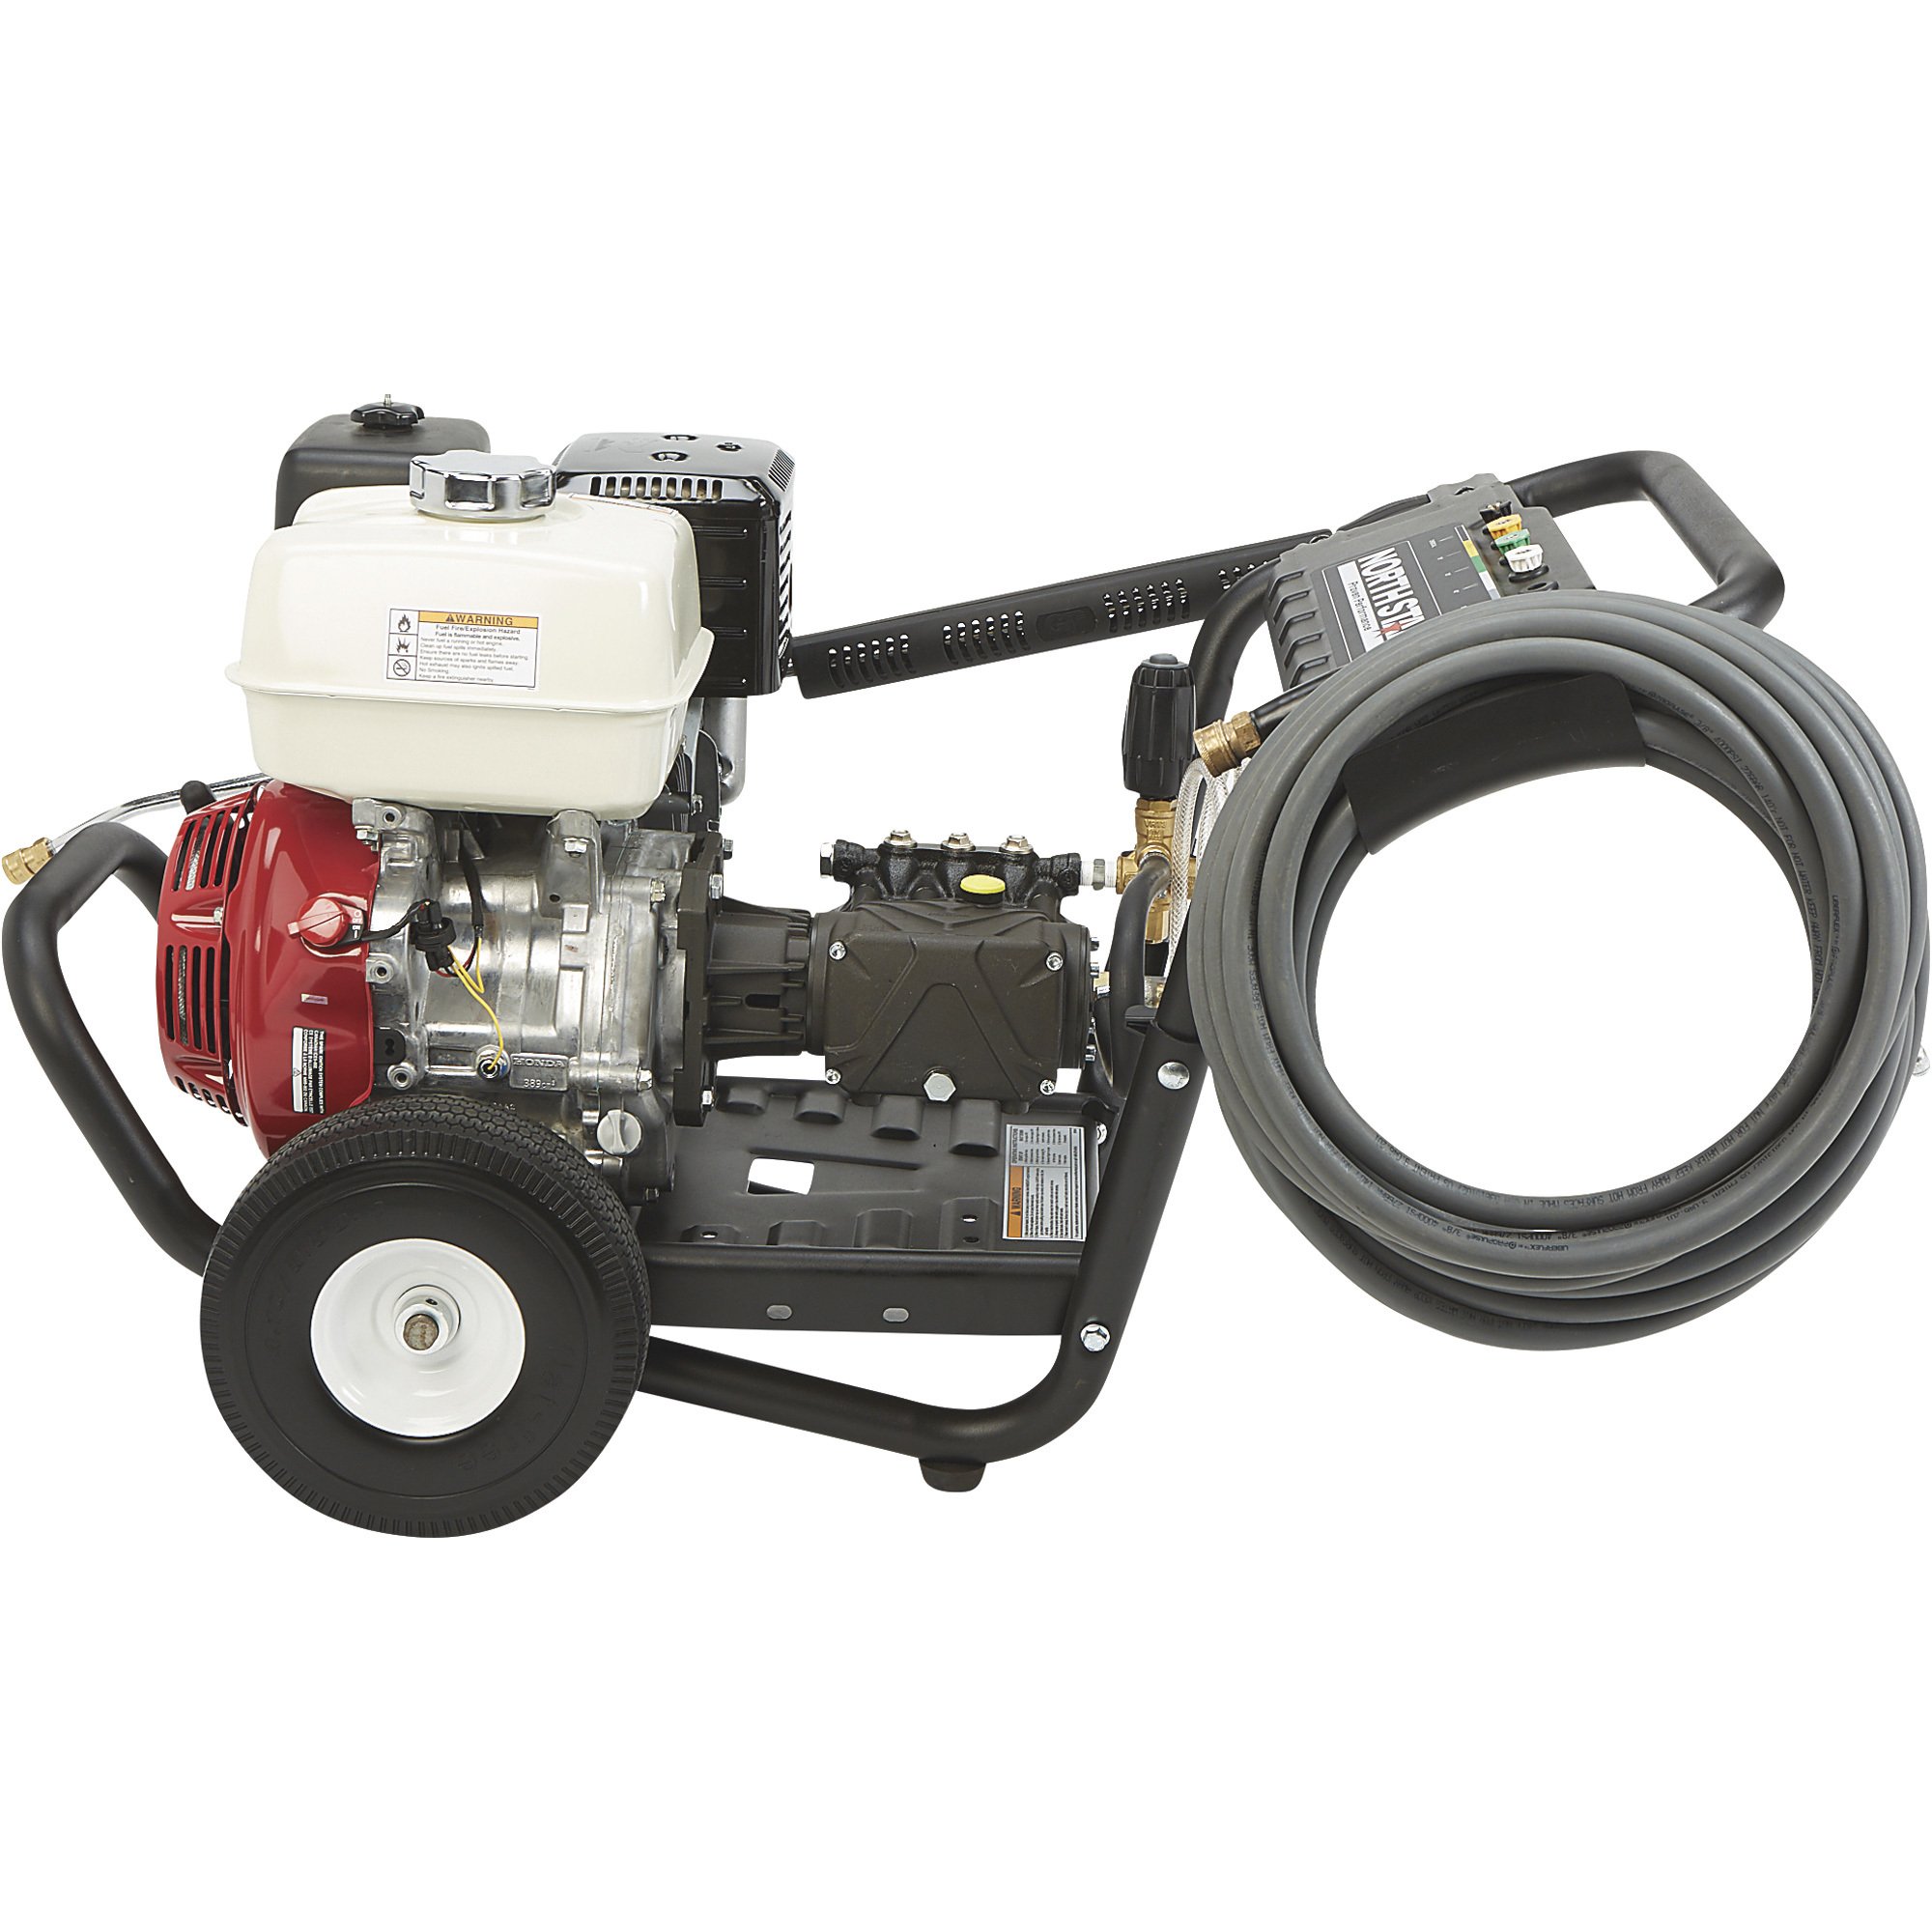 For Sale in California Only — NorthStar Gas Hot Water Commercial Pressure  Washer Skid — 4,000 PSI, 4.0 GPM, Honda Engine